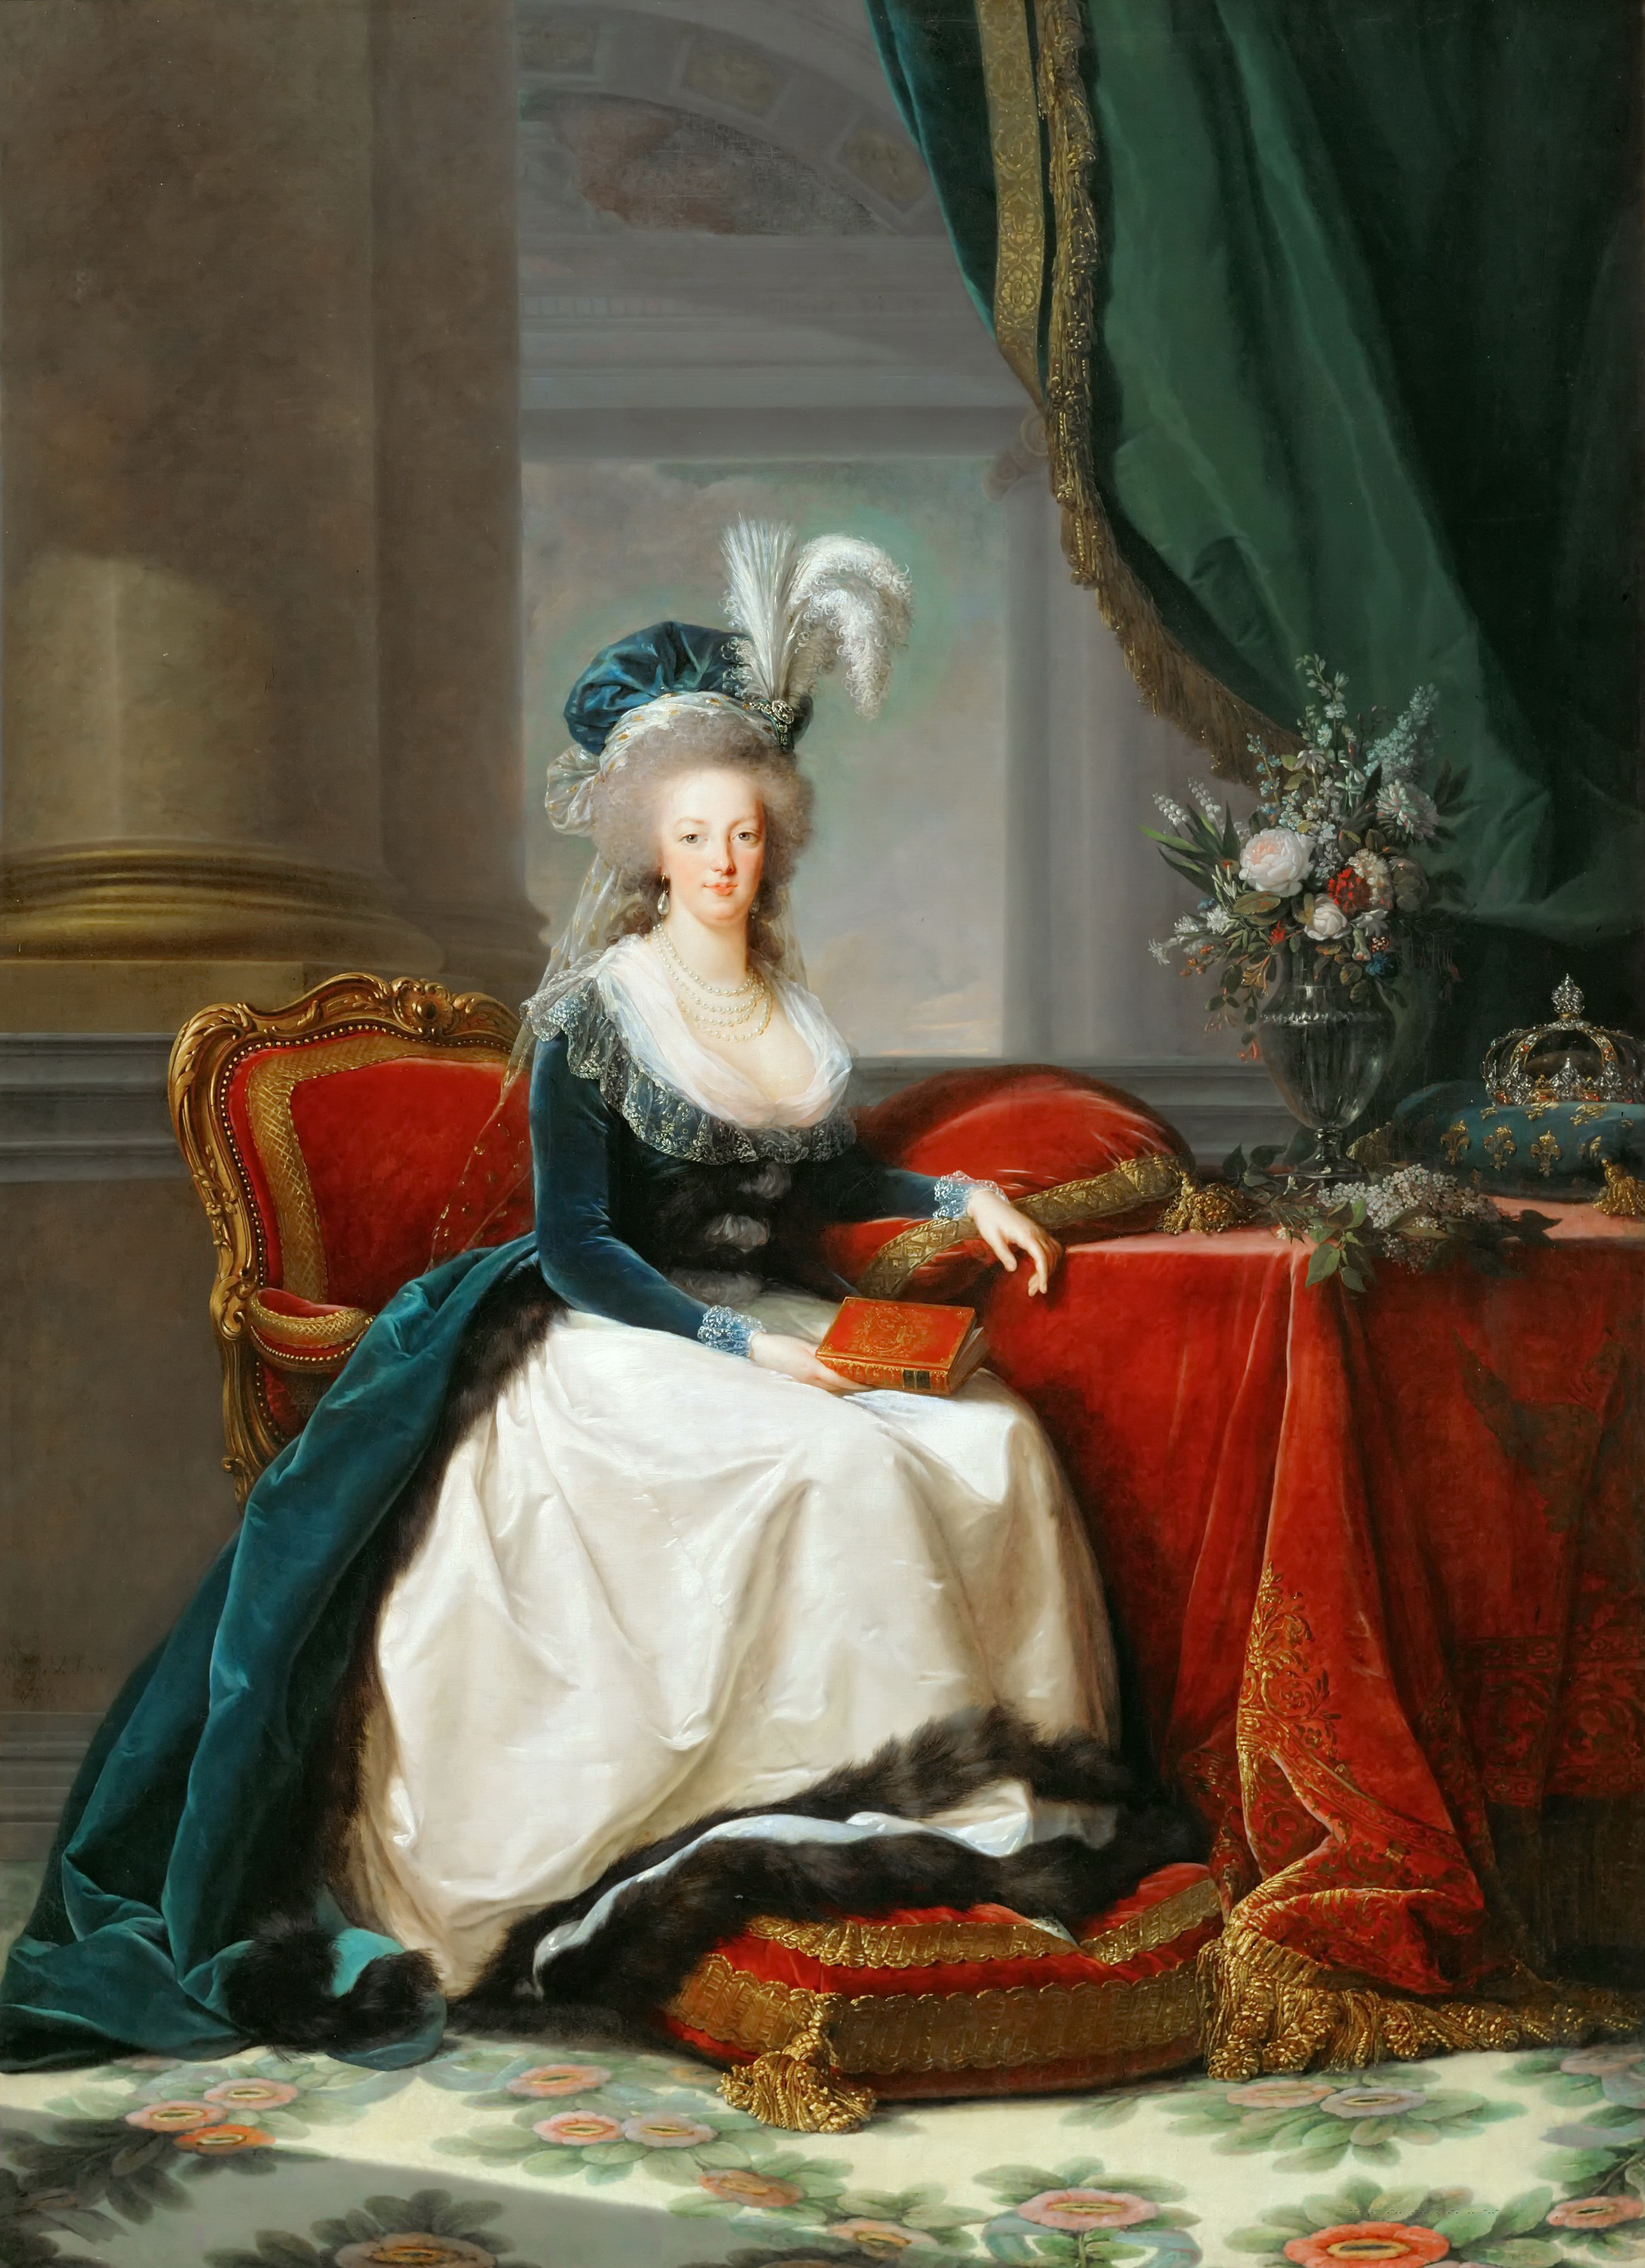 Woman (Marie Antoinette) seated, elaborate hat, holding a book